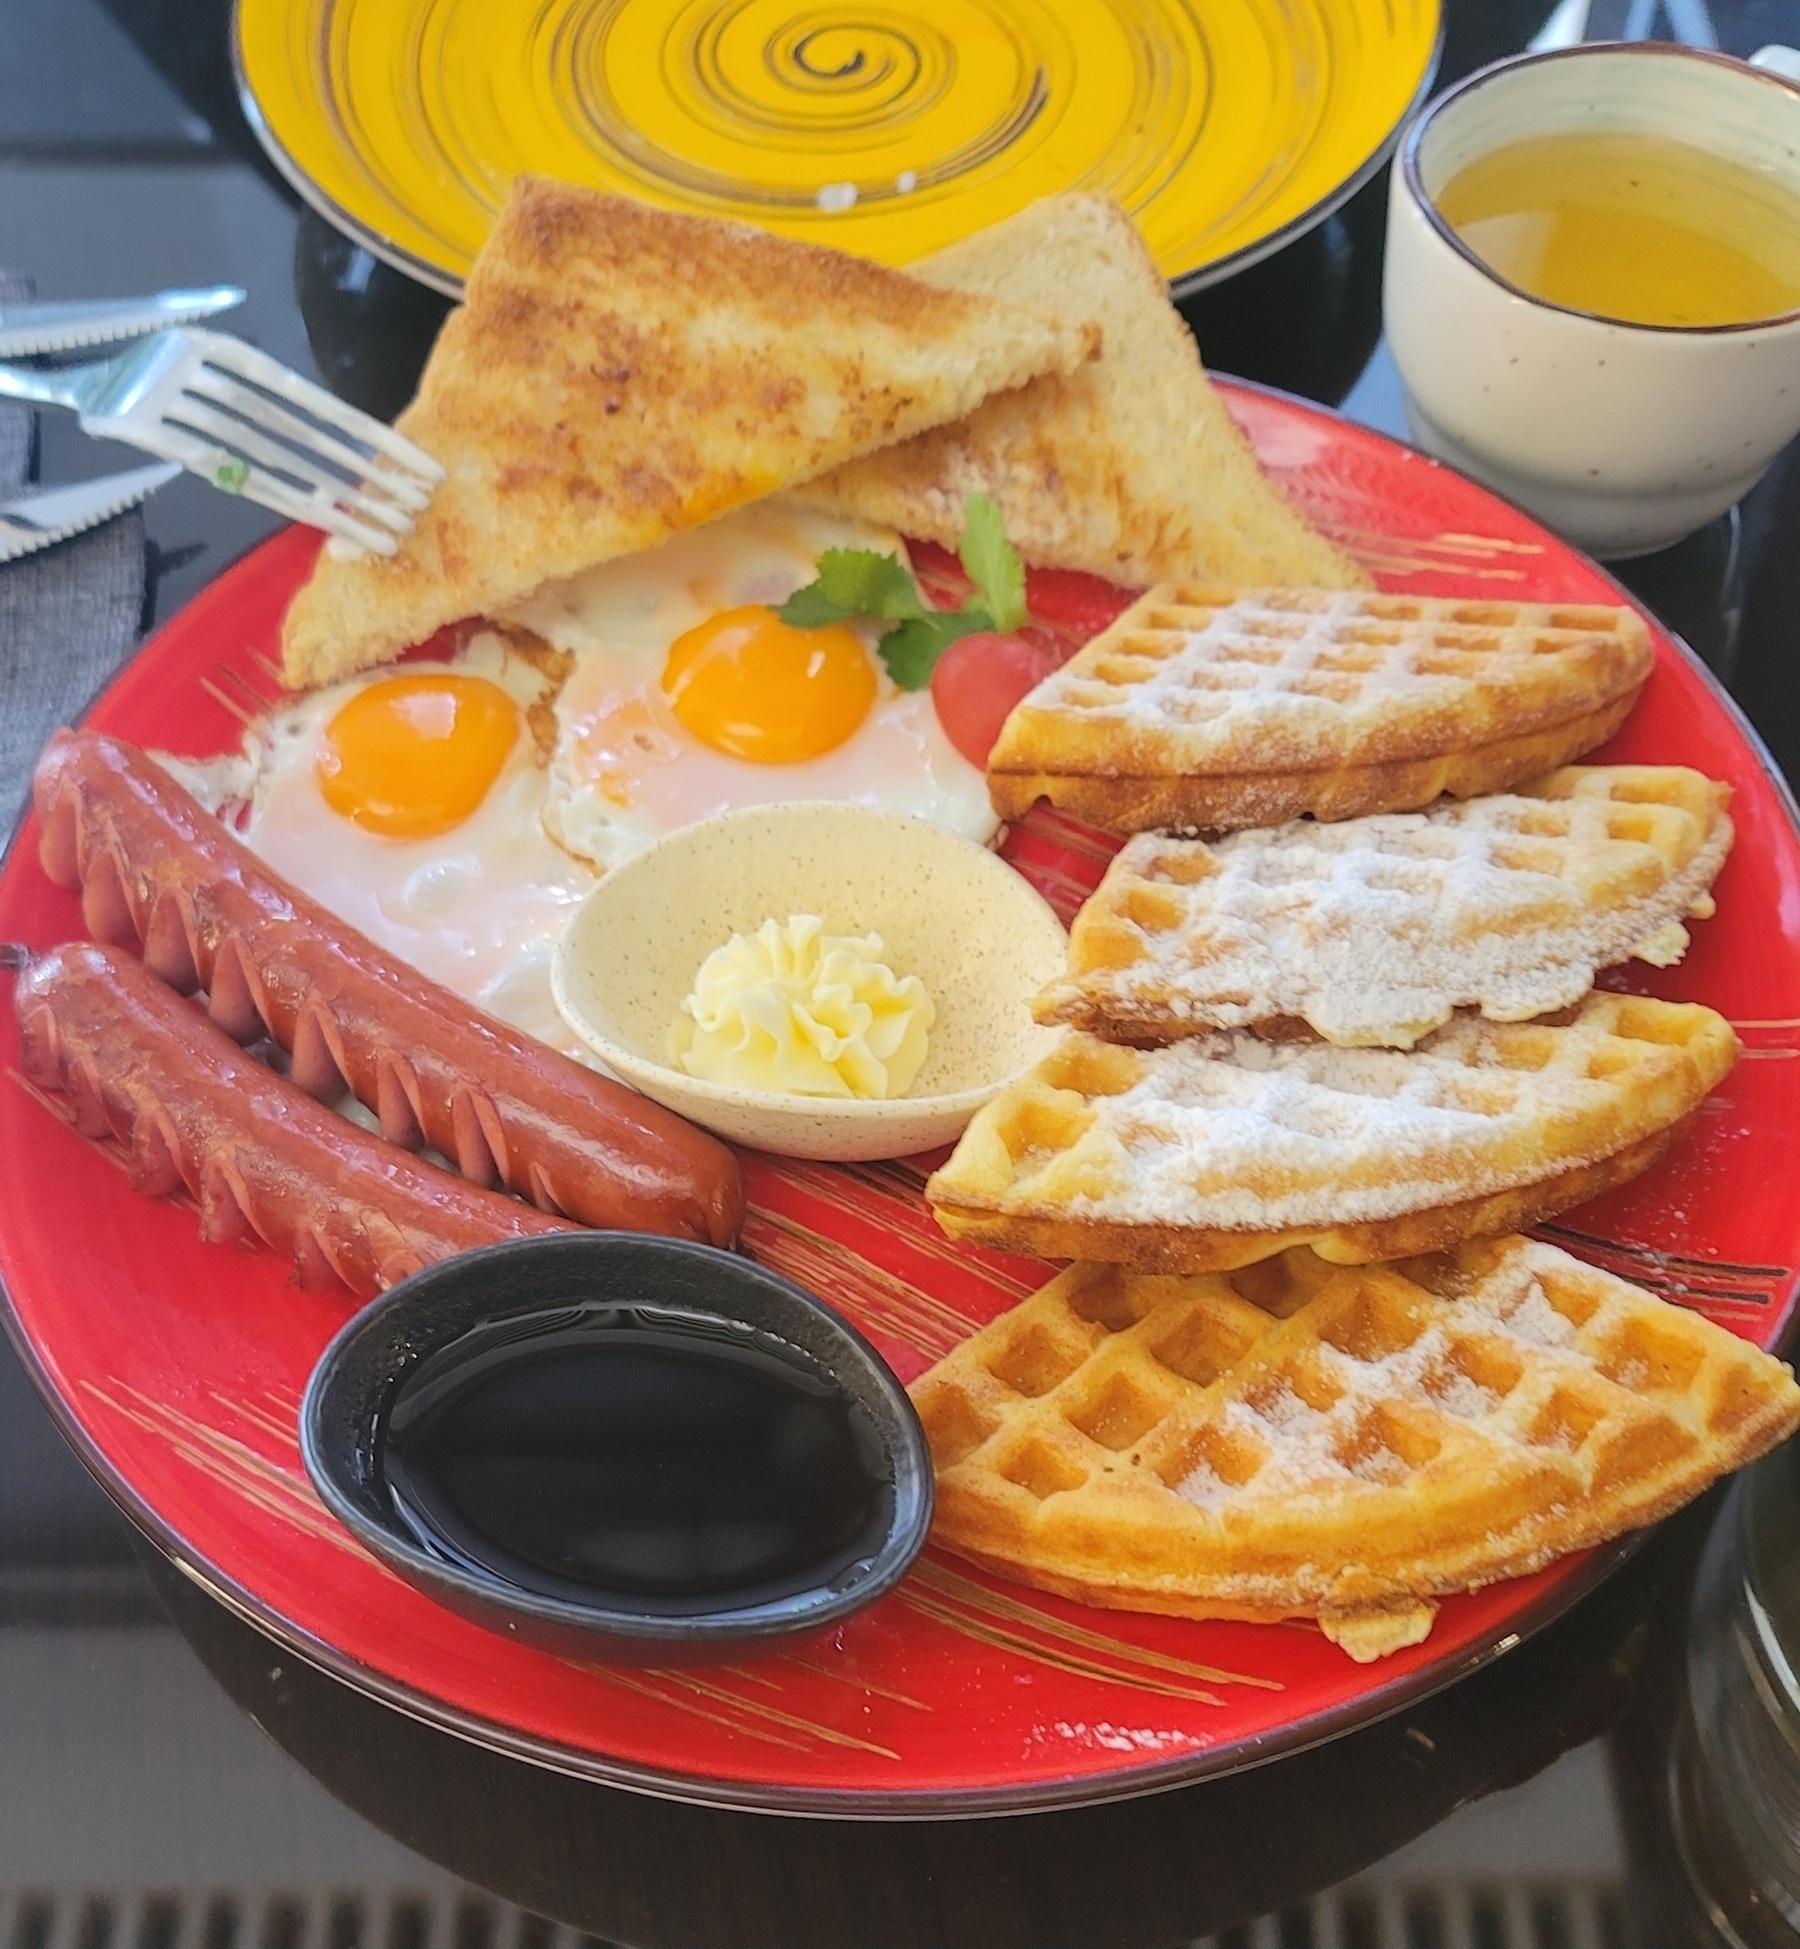 plate with two small pieces of toast, two small fried eggs, a small waffle cut up into 4 pieces, and two sausages. plus small containers of butter and syrup, and a cup of green tea in the top right